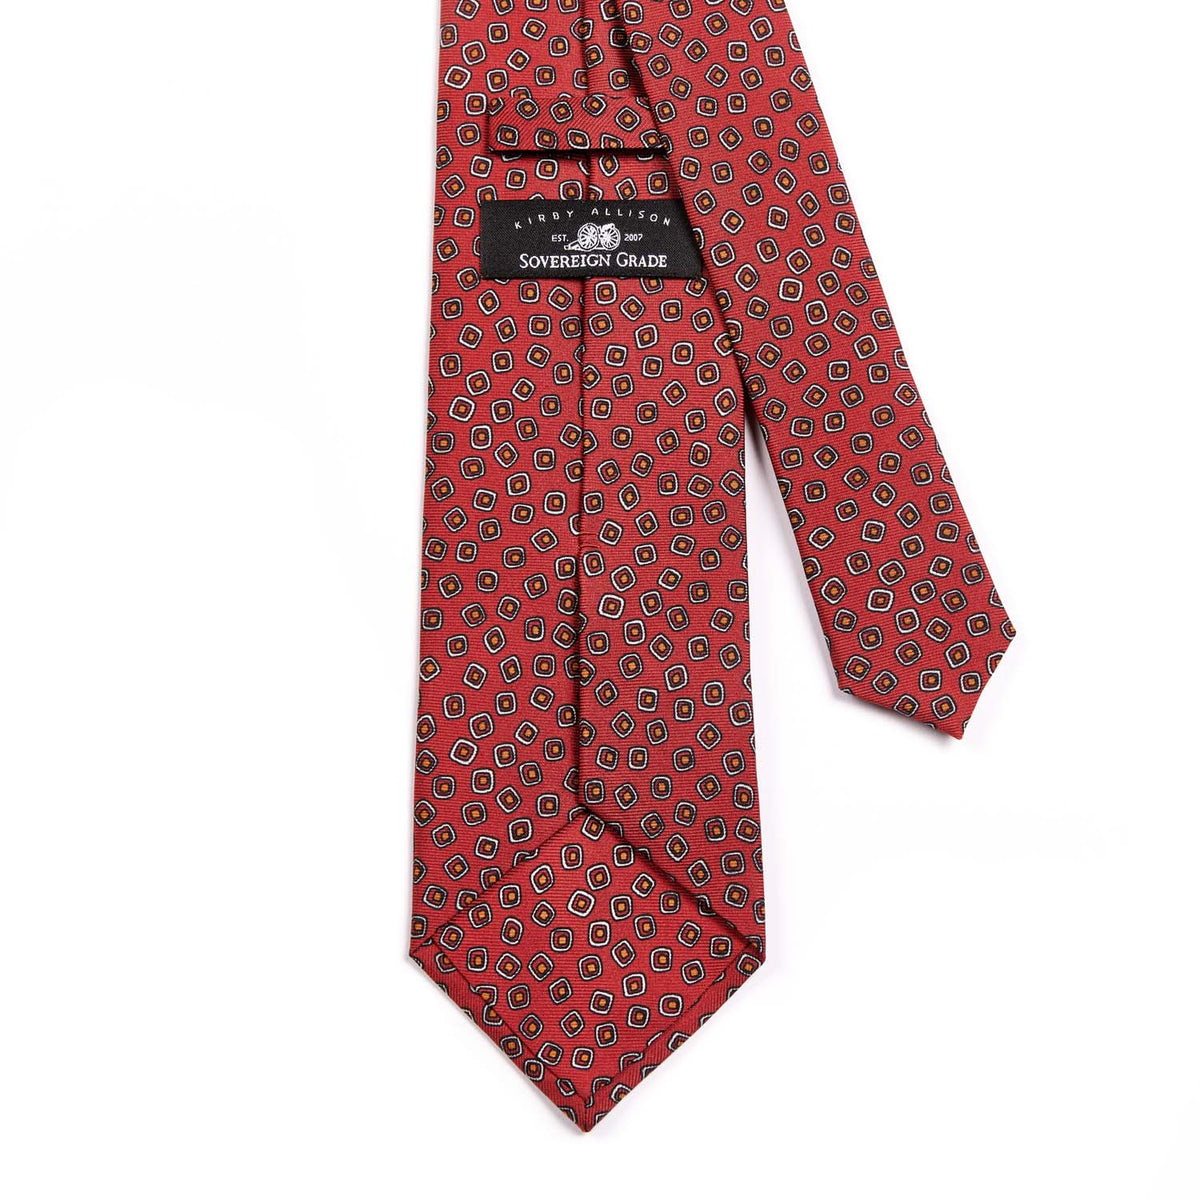 A Sovereign Grade Red Eton Printed Silk, 150cm tie from KirbyAllison.com with a black and white pattern of the highest quality.